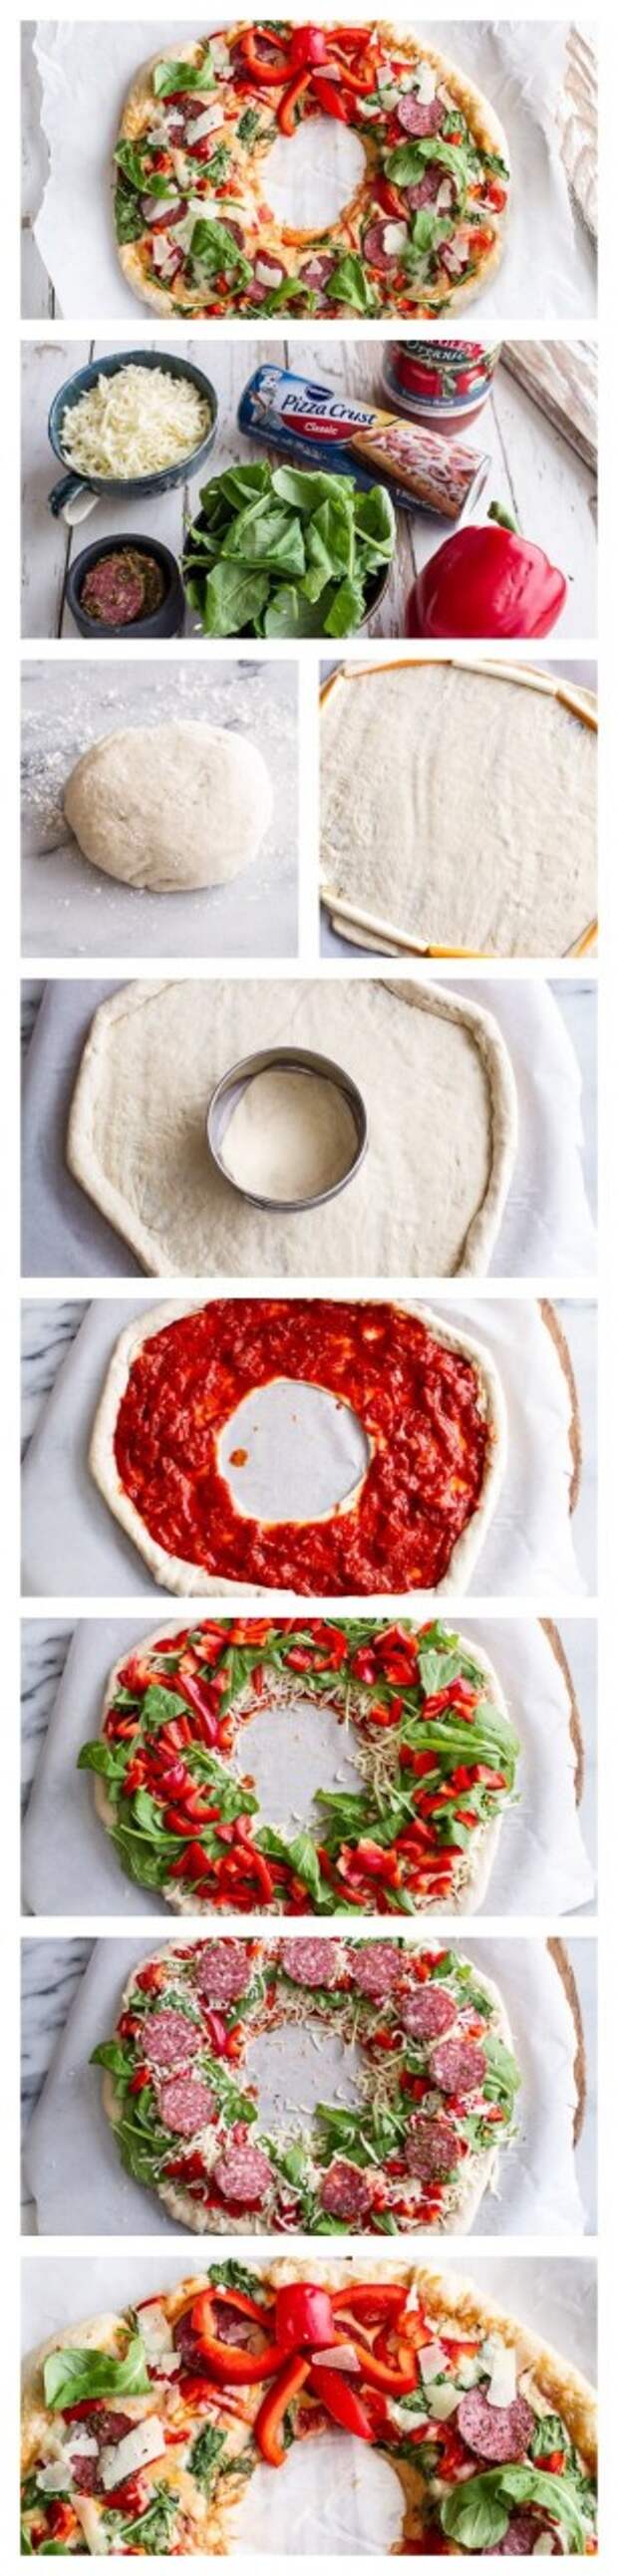 Pizza Wreath // easy to customize with your favorite toppings and crust, you can even make mini wreaths for individual servings: 